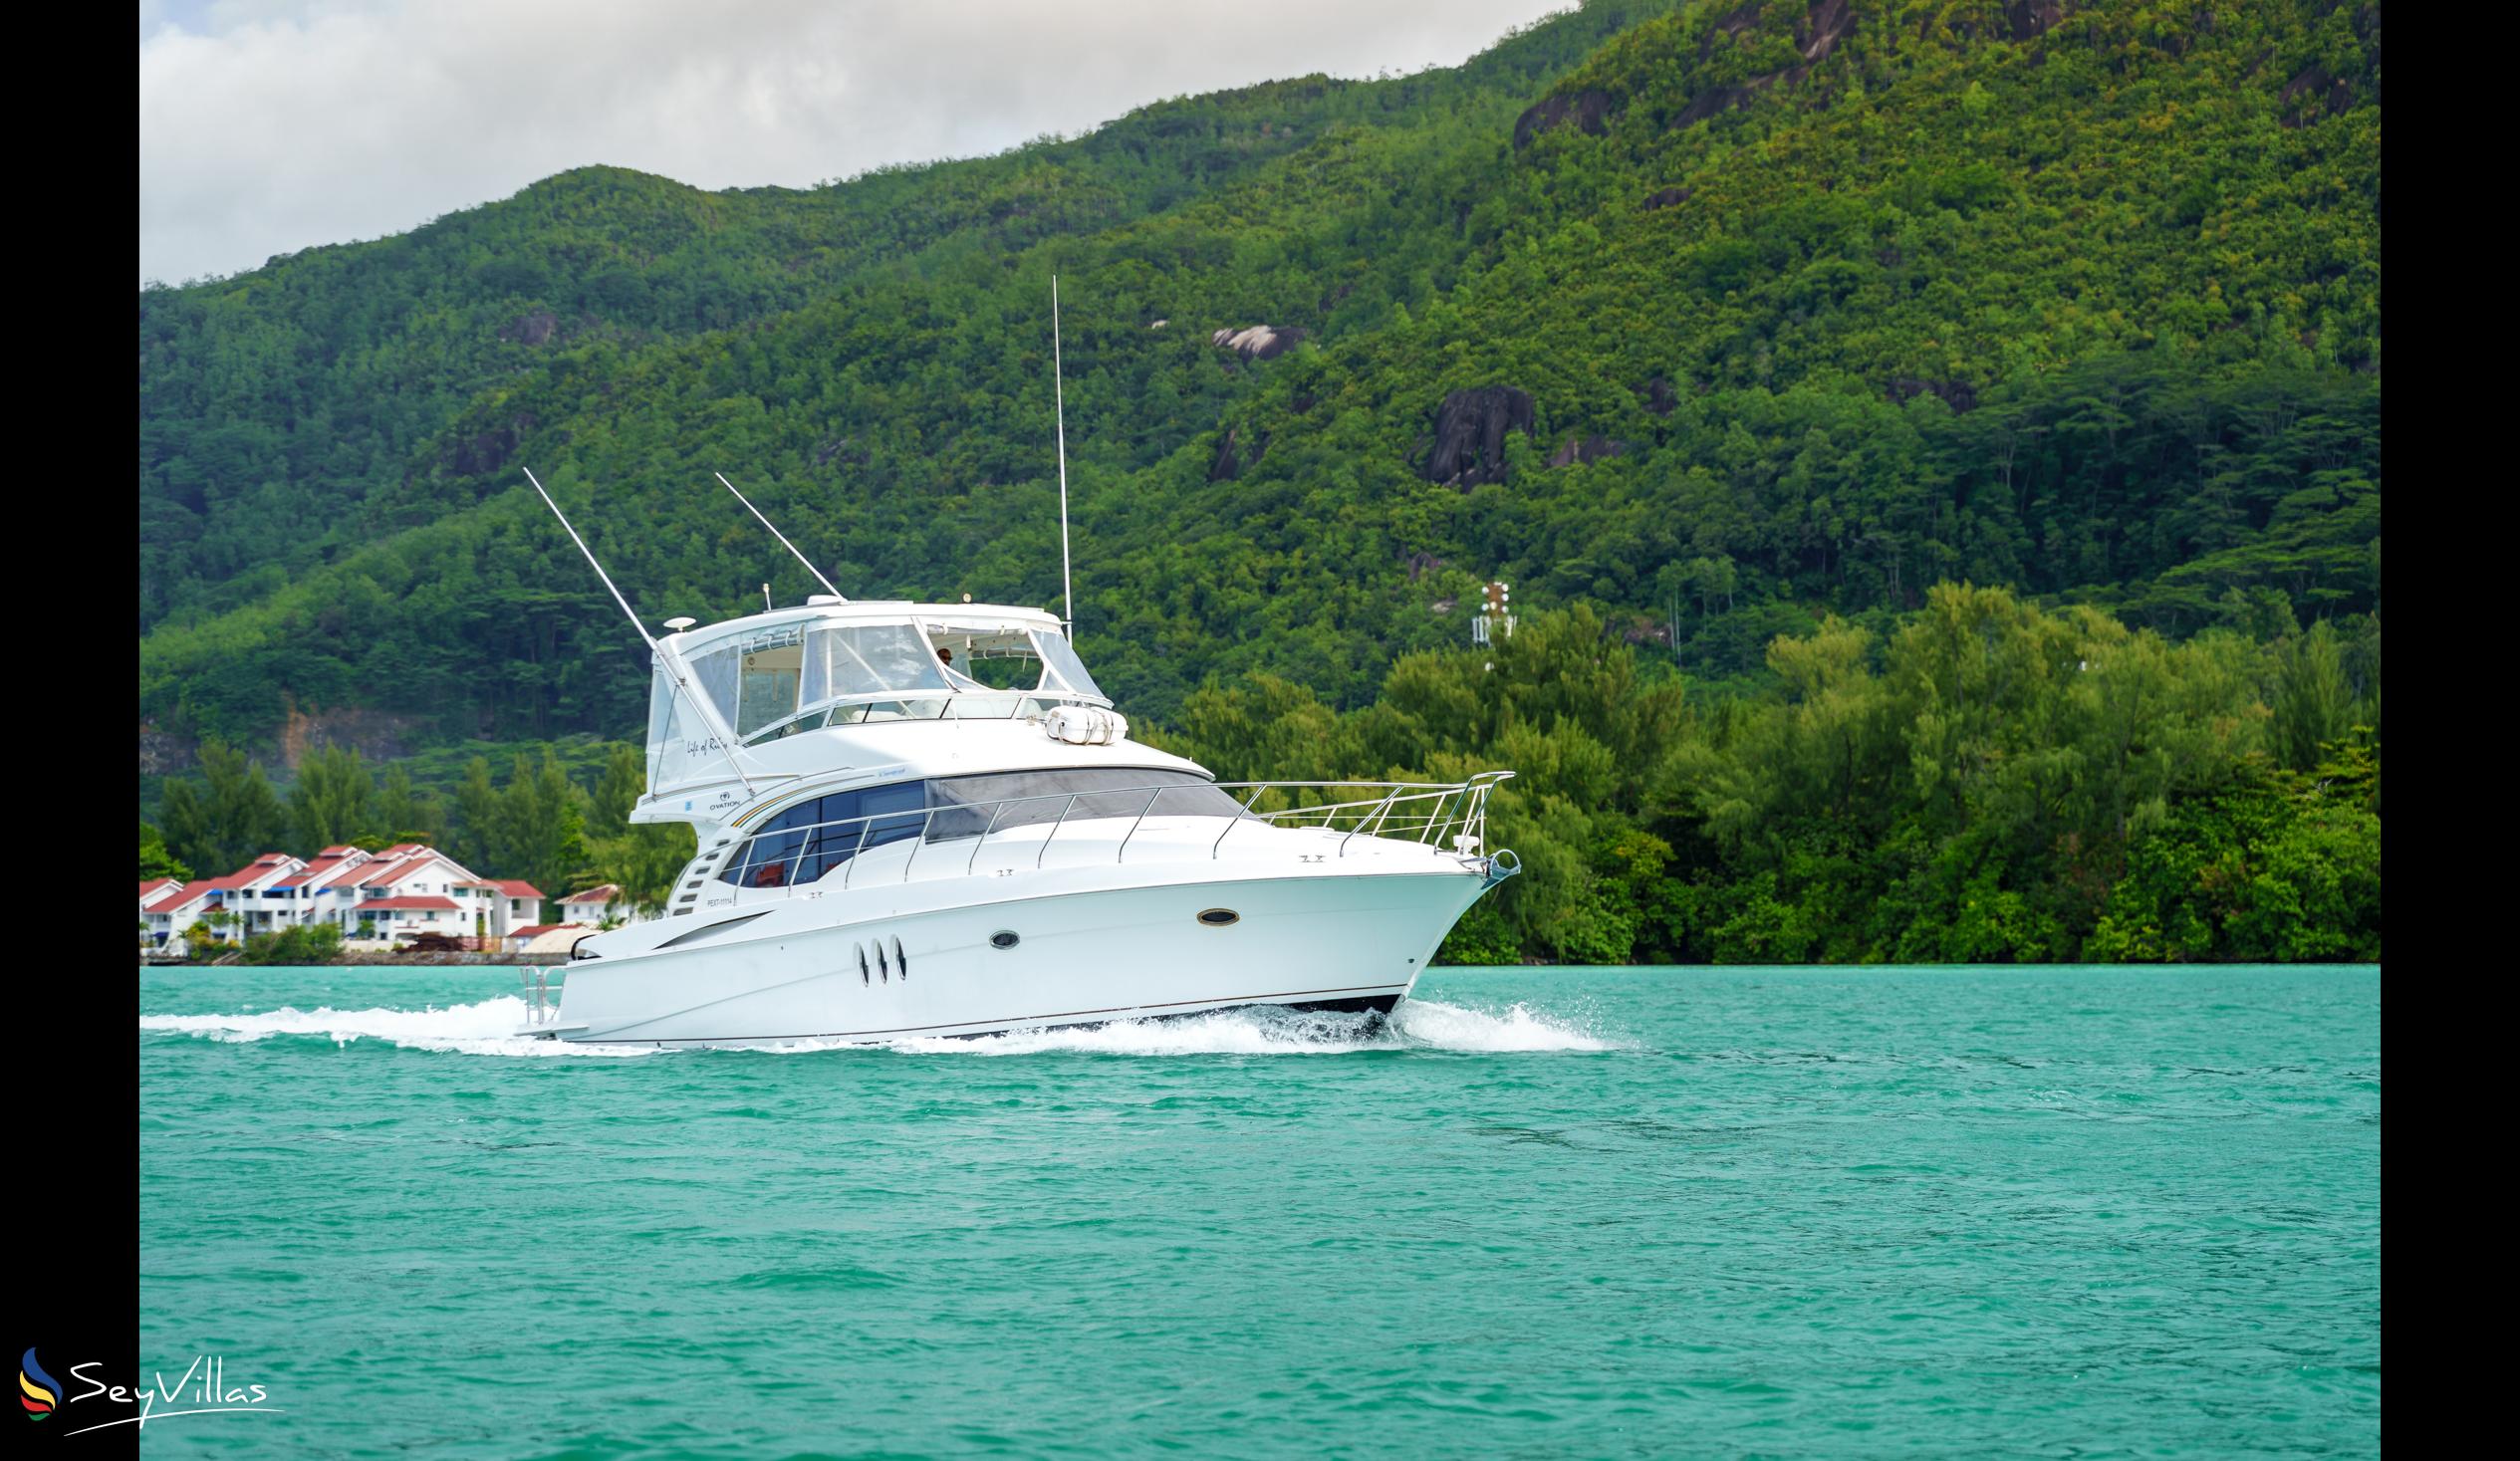 Foto 41: Seyscapes Yacht Charter - Charter Completo Life of Riley - Seychelles (Seychelles)